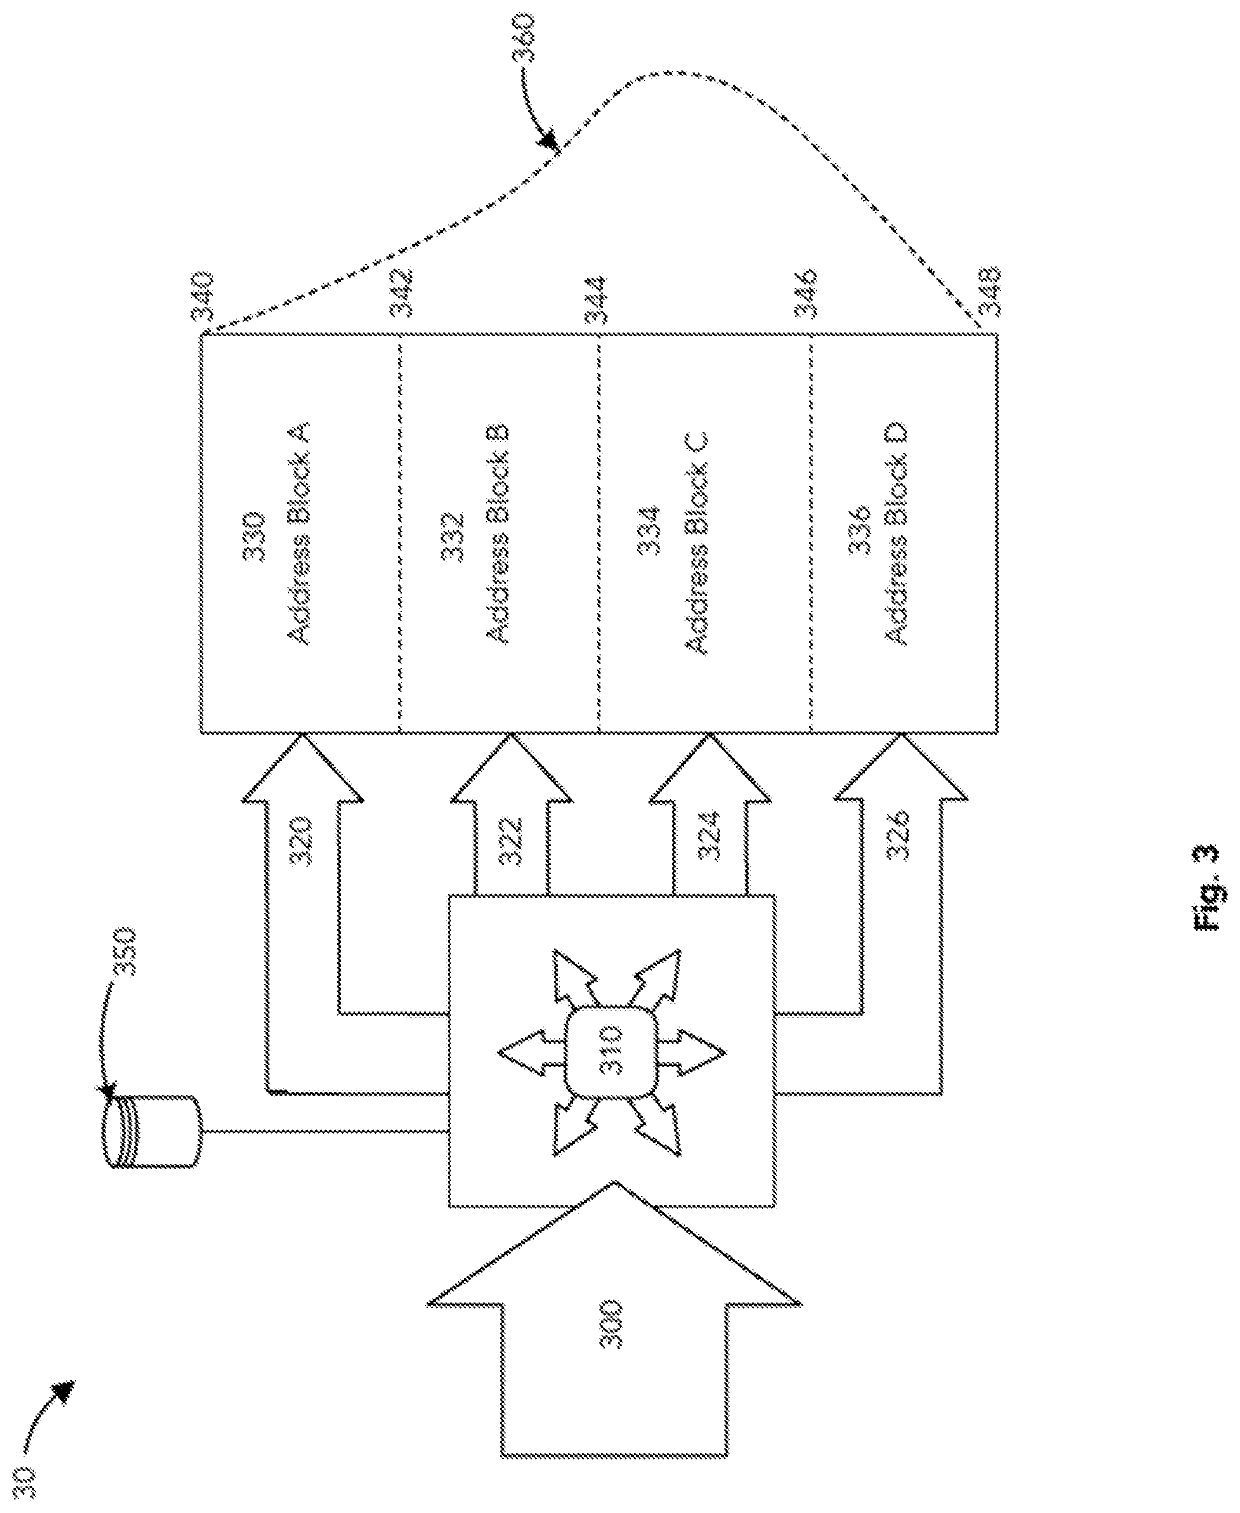 Managing electronic messages with a message transfer agent